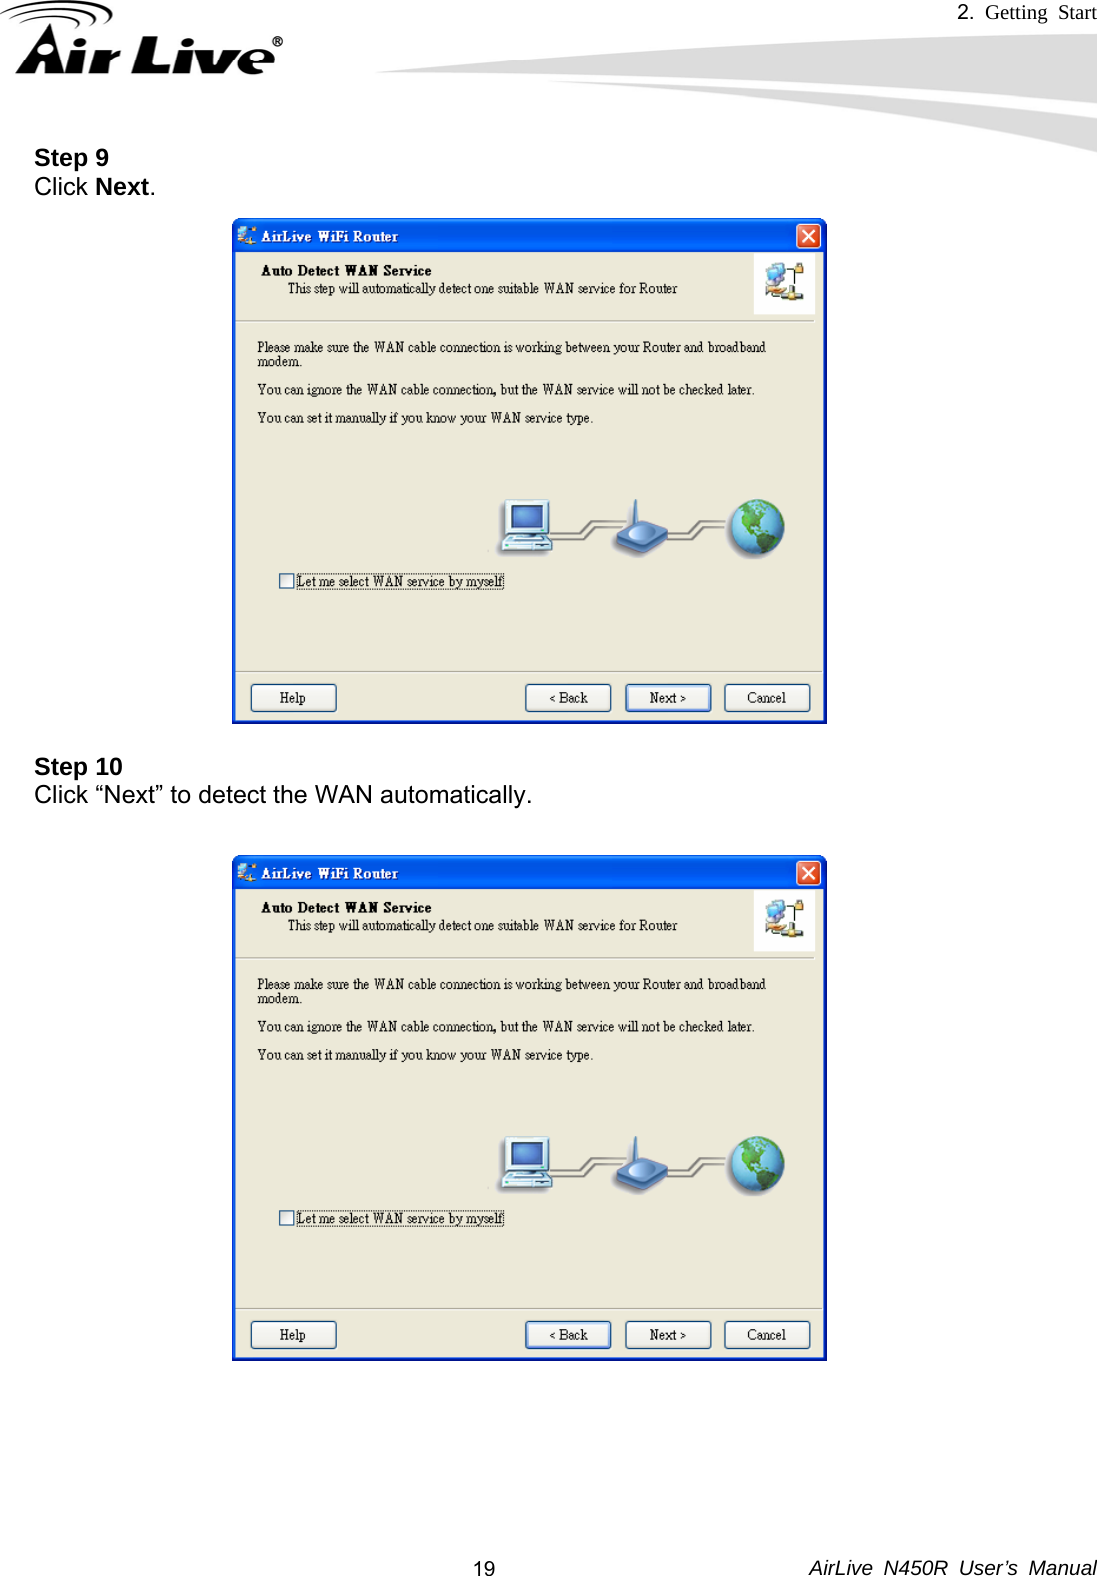 2.  Getting Start     AirLive N450R User’s Manual  19Step 9 Click Next.  Step 10 Click “Next” to detect the WAN automatically.        